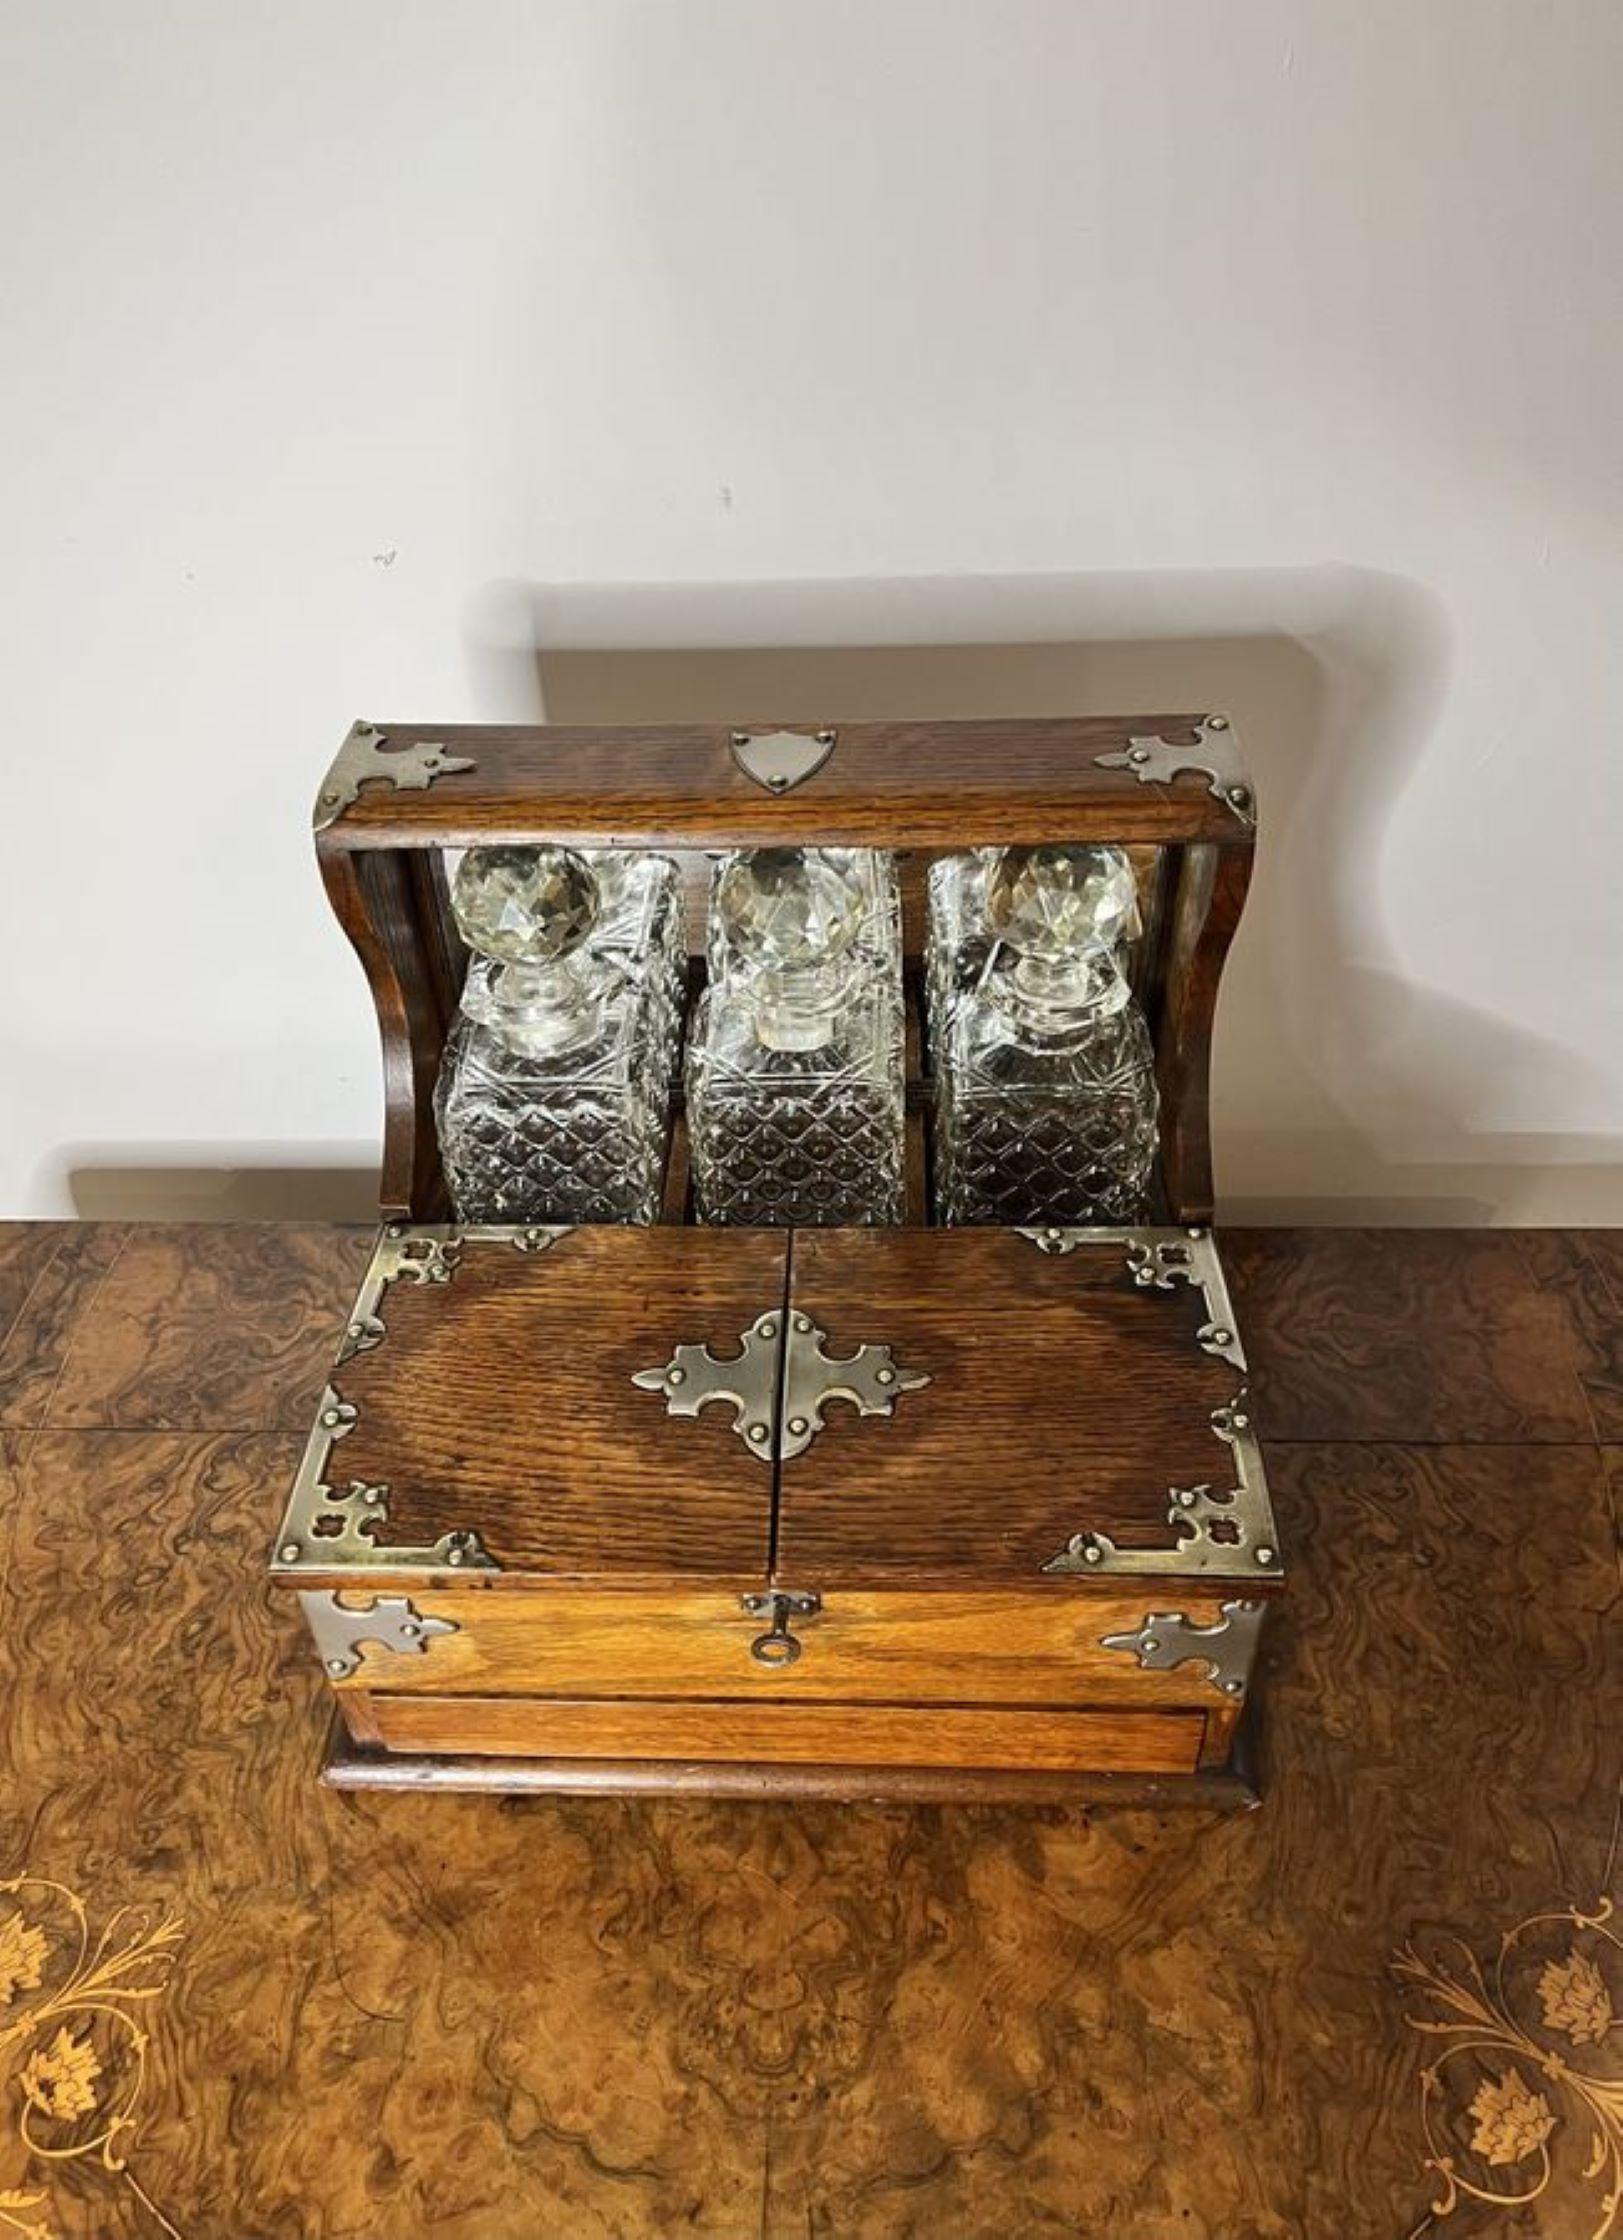 Quality antique Victorian oak tantalus and games box, having a quality oak tantalus with silvered metal mounts, carrying handles to the sides, mirror back and a compartment with three square cut glass decanters. Working lock and key with a